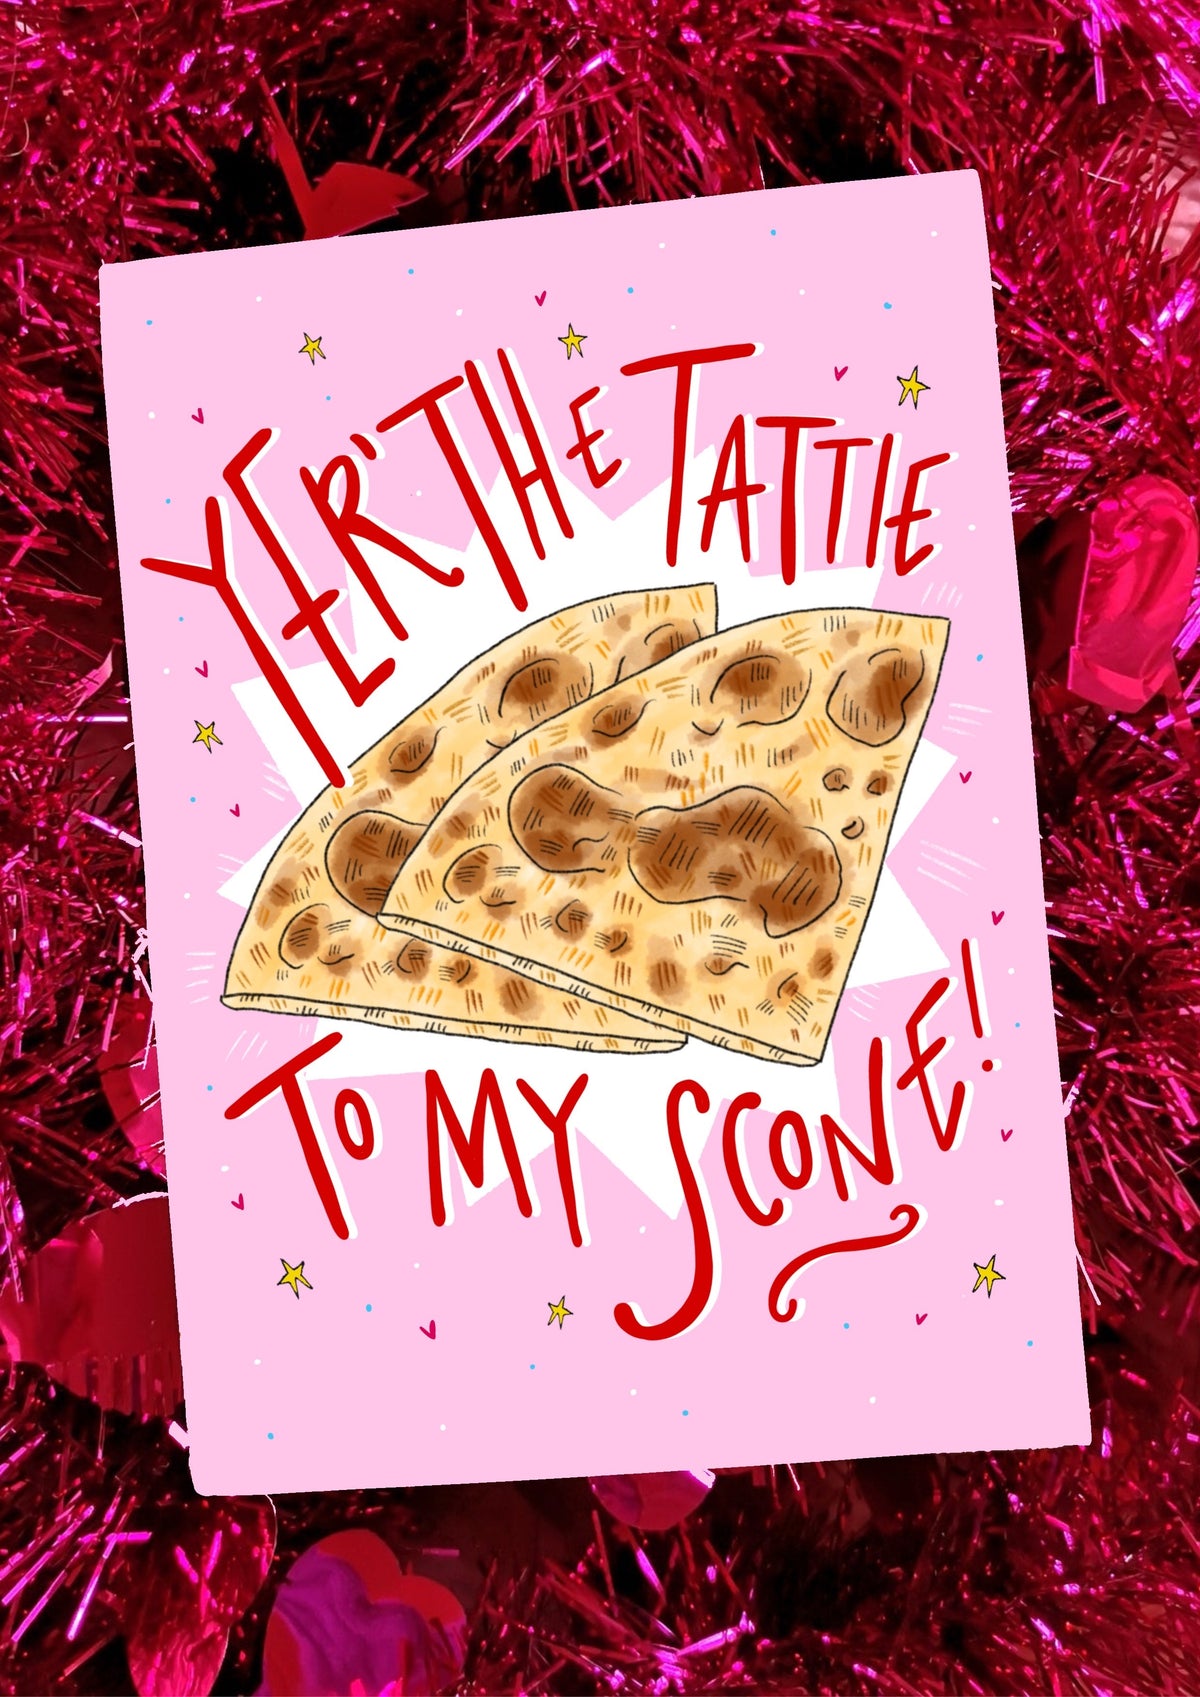 Tattie To My Scone Scots Valentine Card by claire barclay at penny black